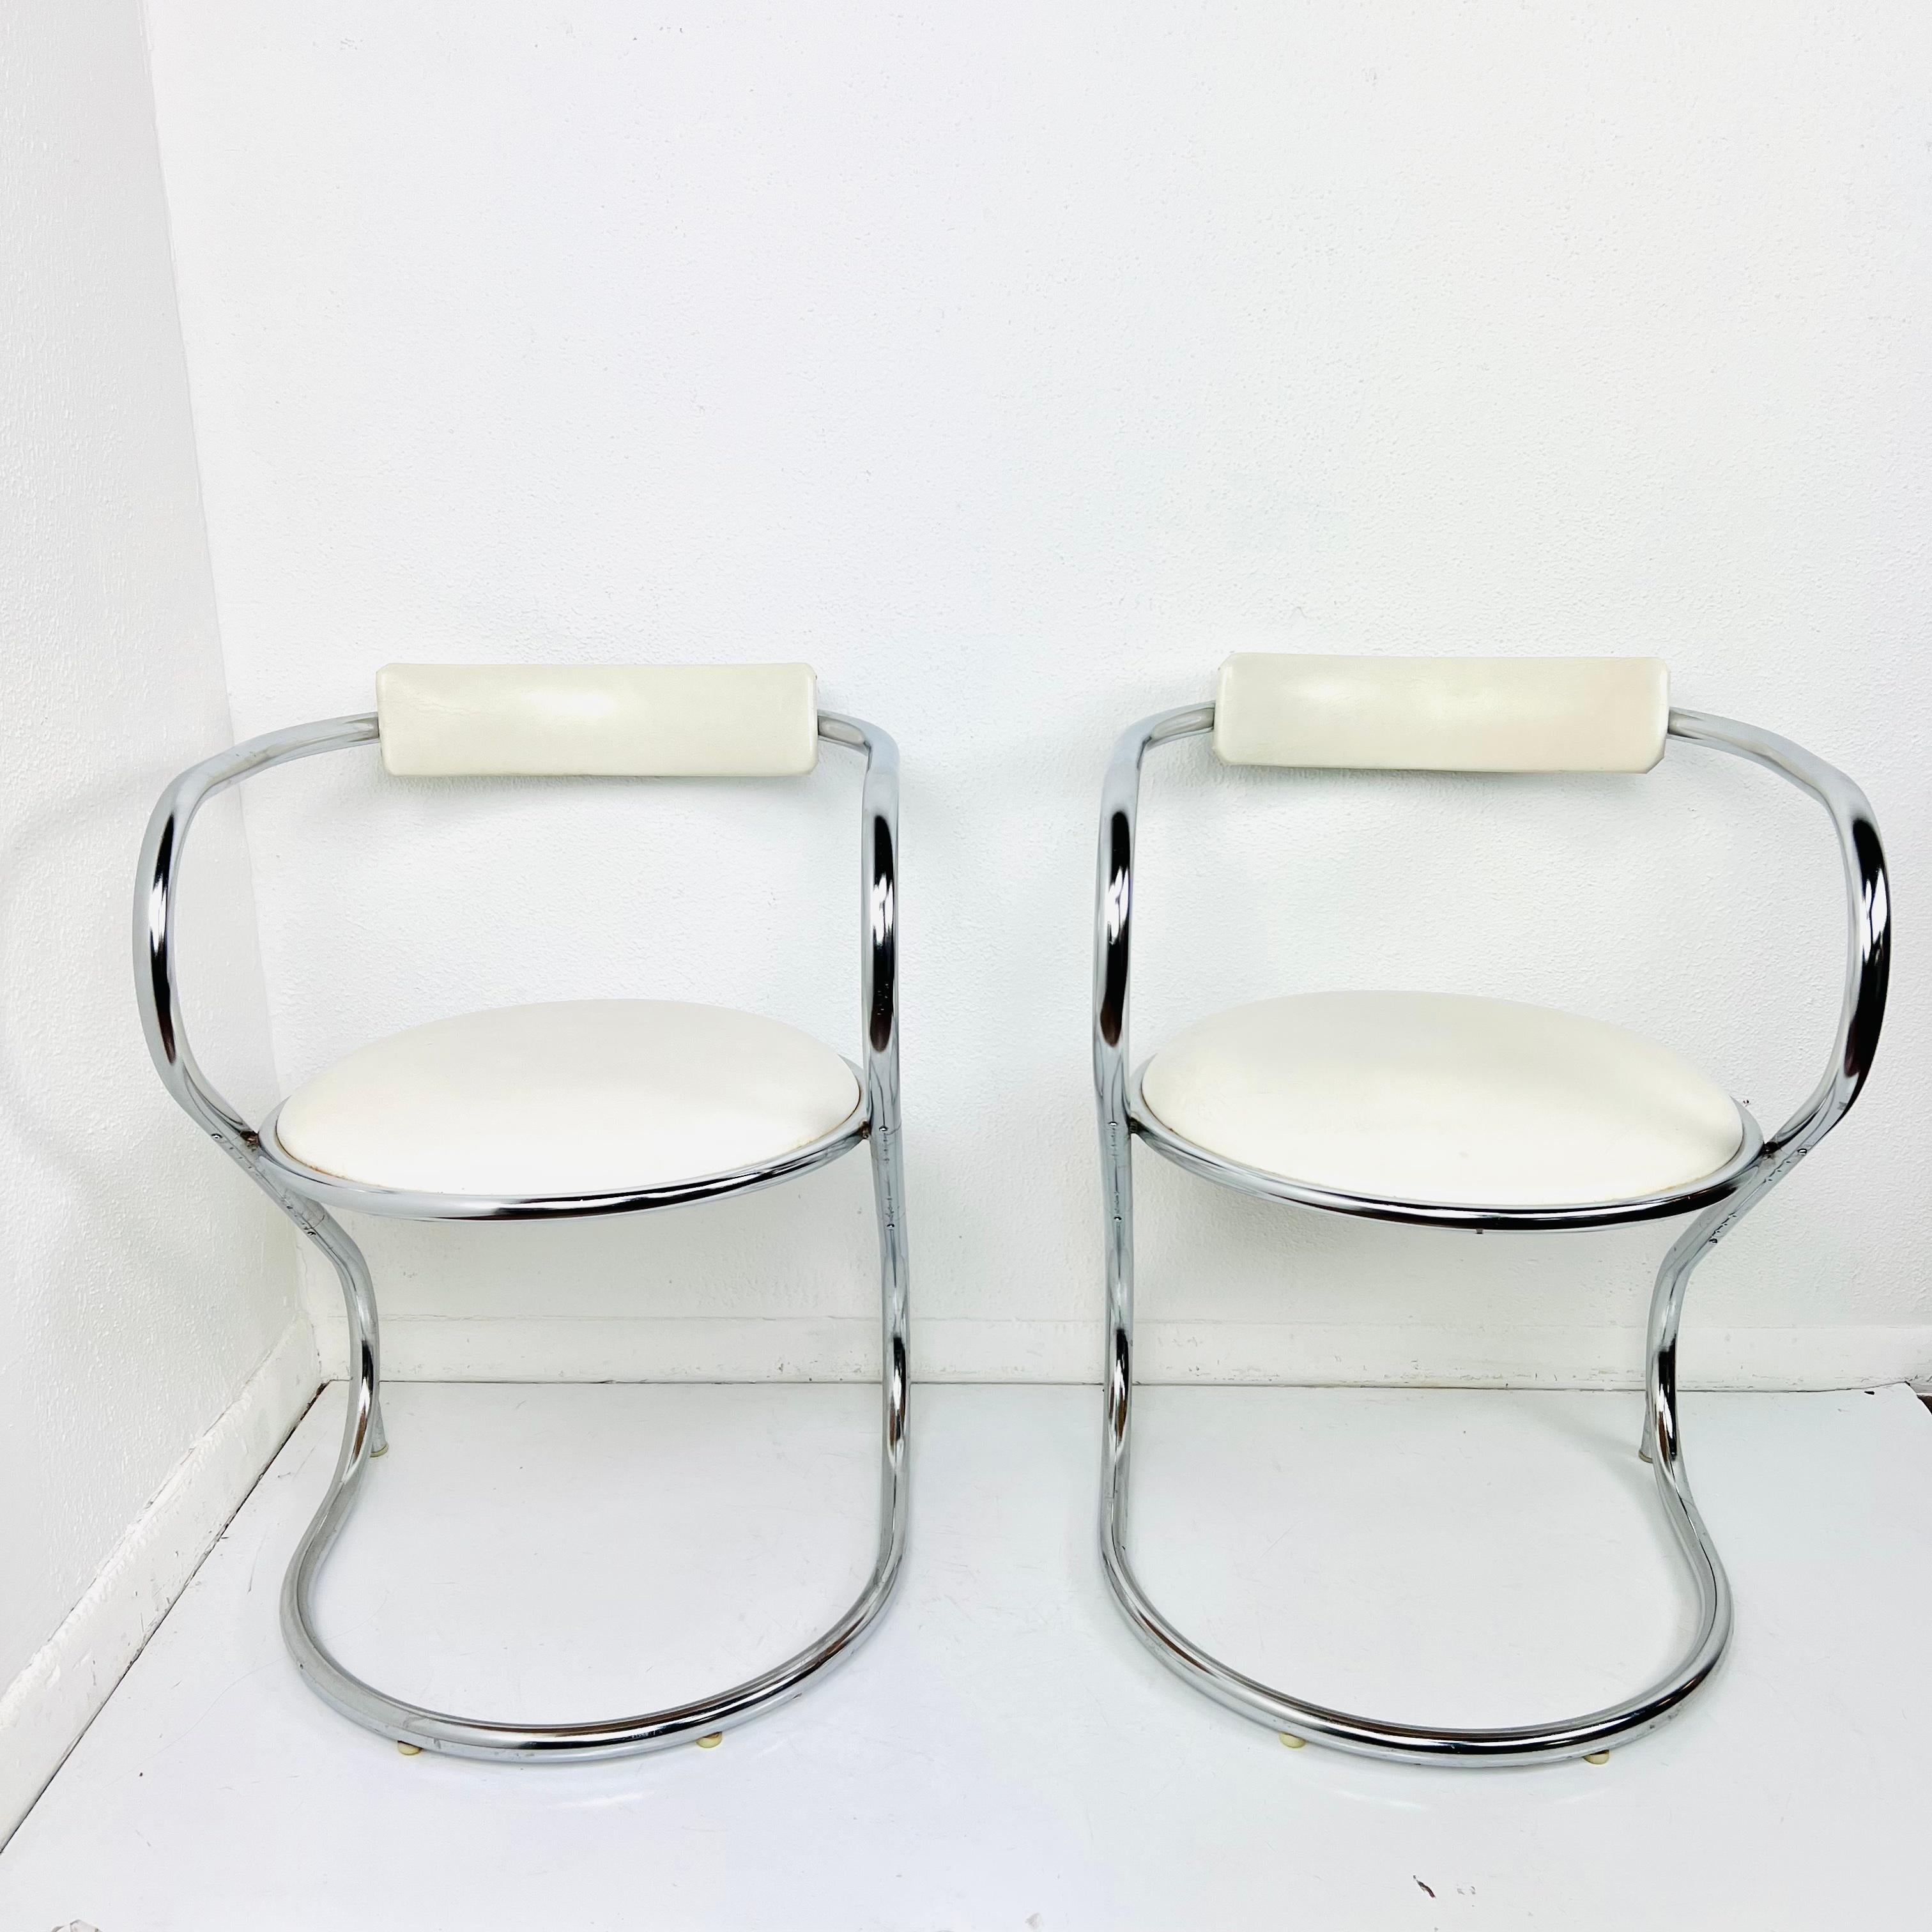 Chic pair of chairs featuring cantilever design, curvaceous steel tube bases, and rounded seats with minimal bar backrests to keep the Silhouette simple and clean. Upholstered in white vinyl. Condition is good, with some minor pitting to chrome and